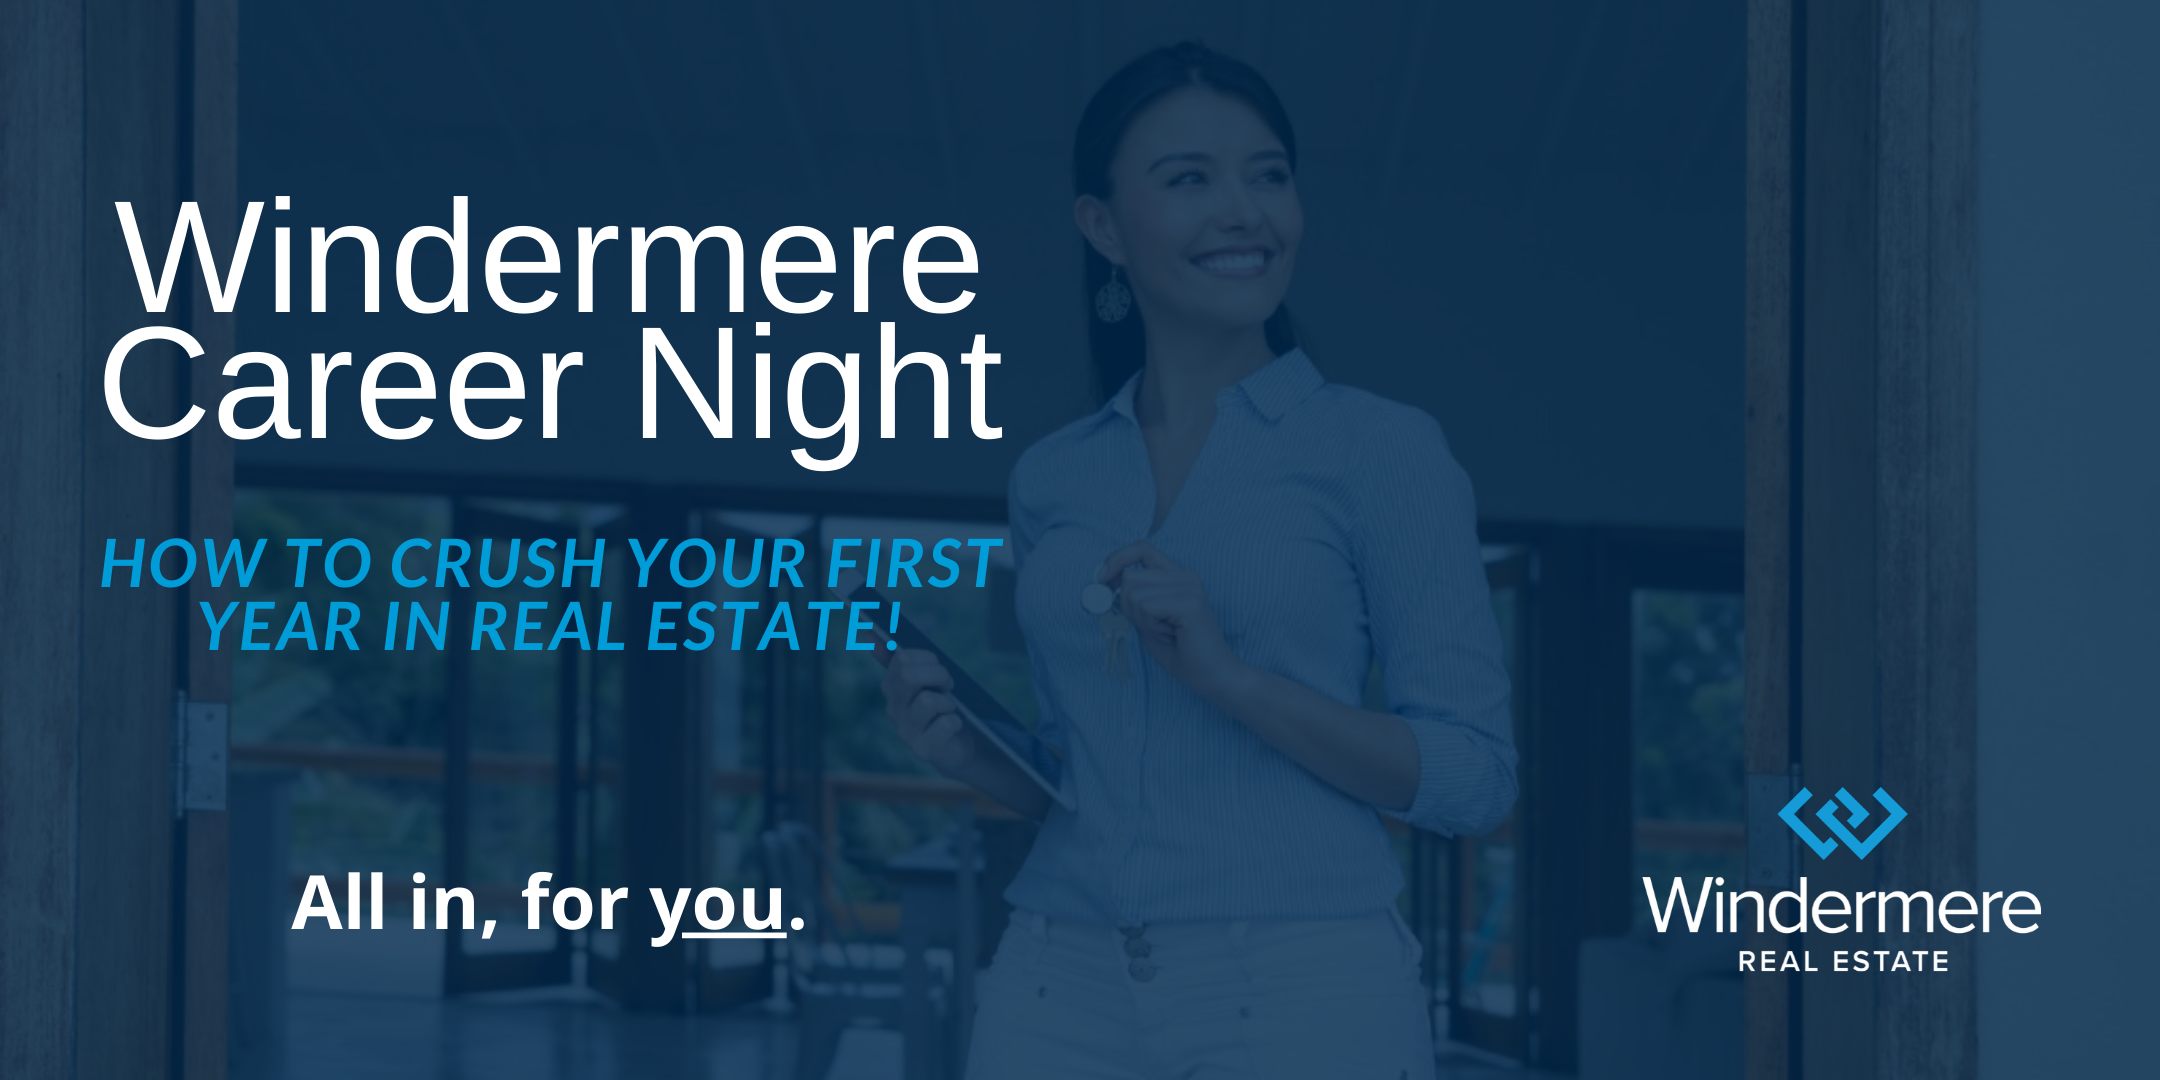 WINDERMERE CAREER NIGHT: How to Crush Your First Year in Real Estate!